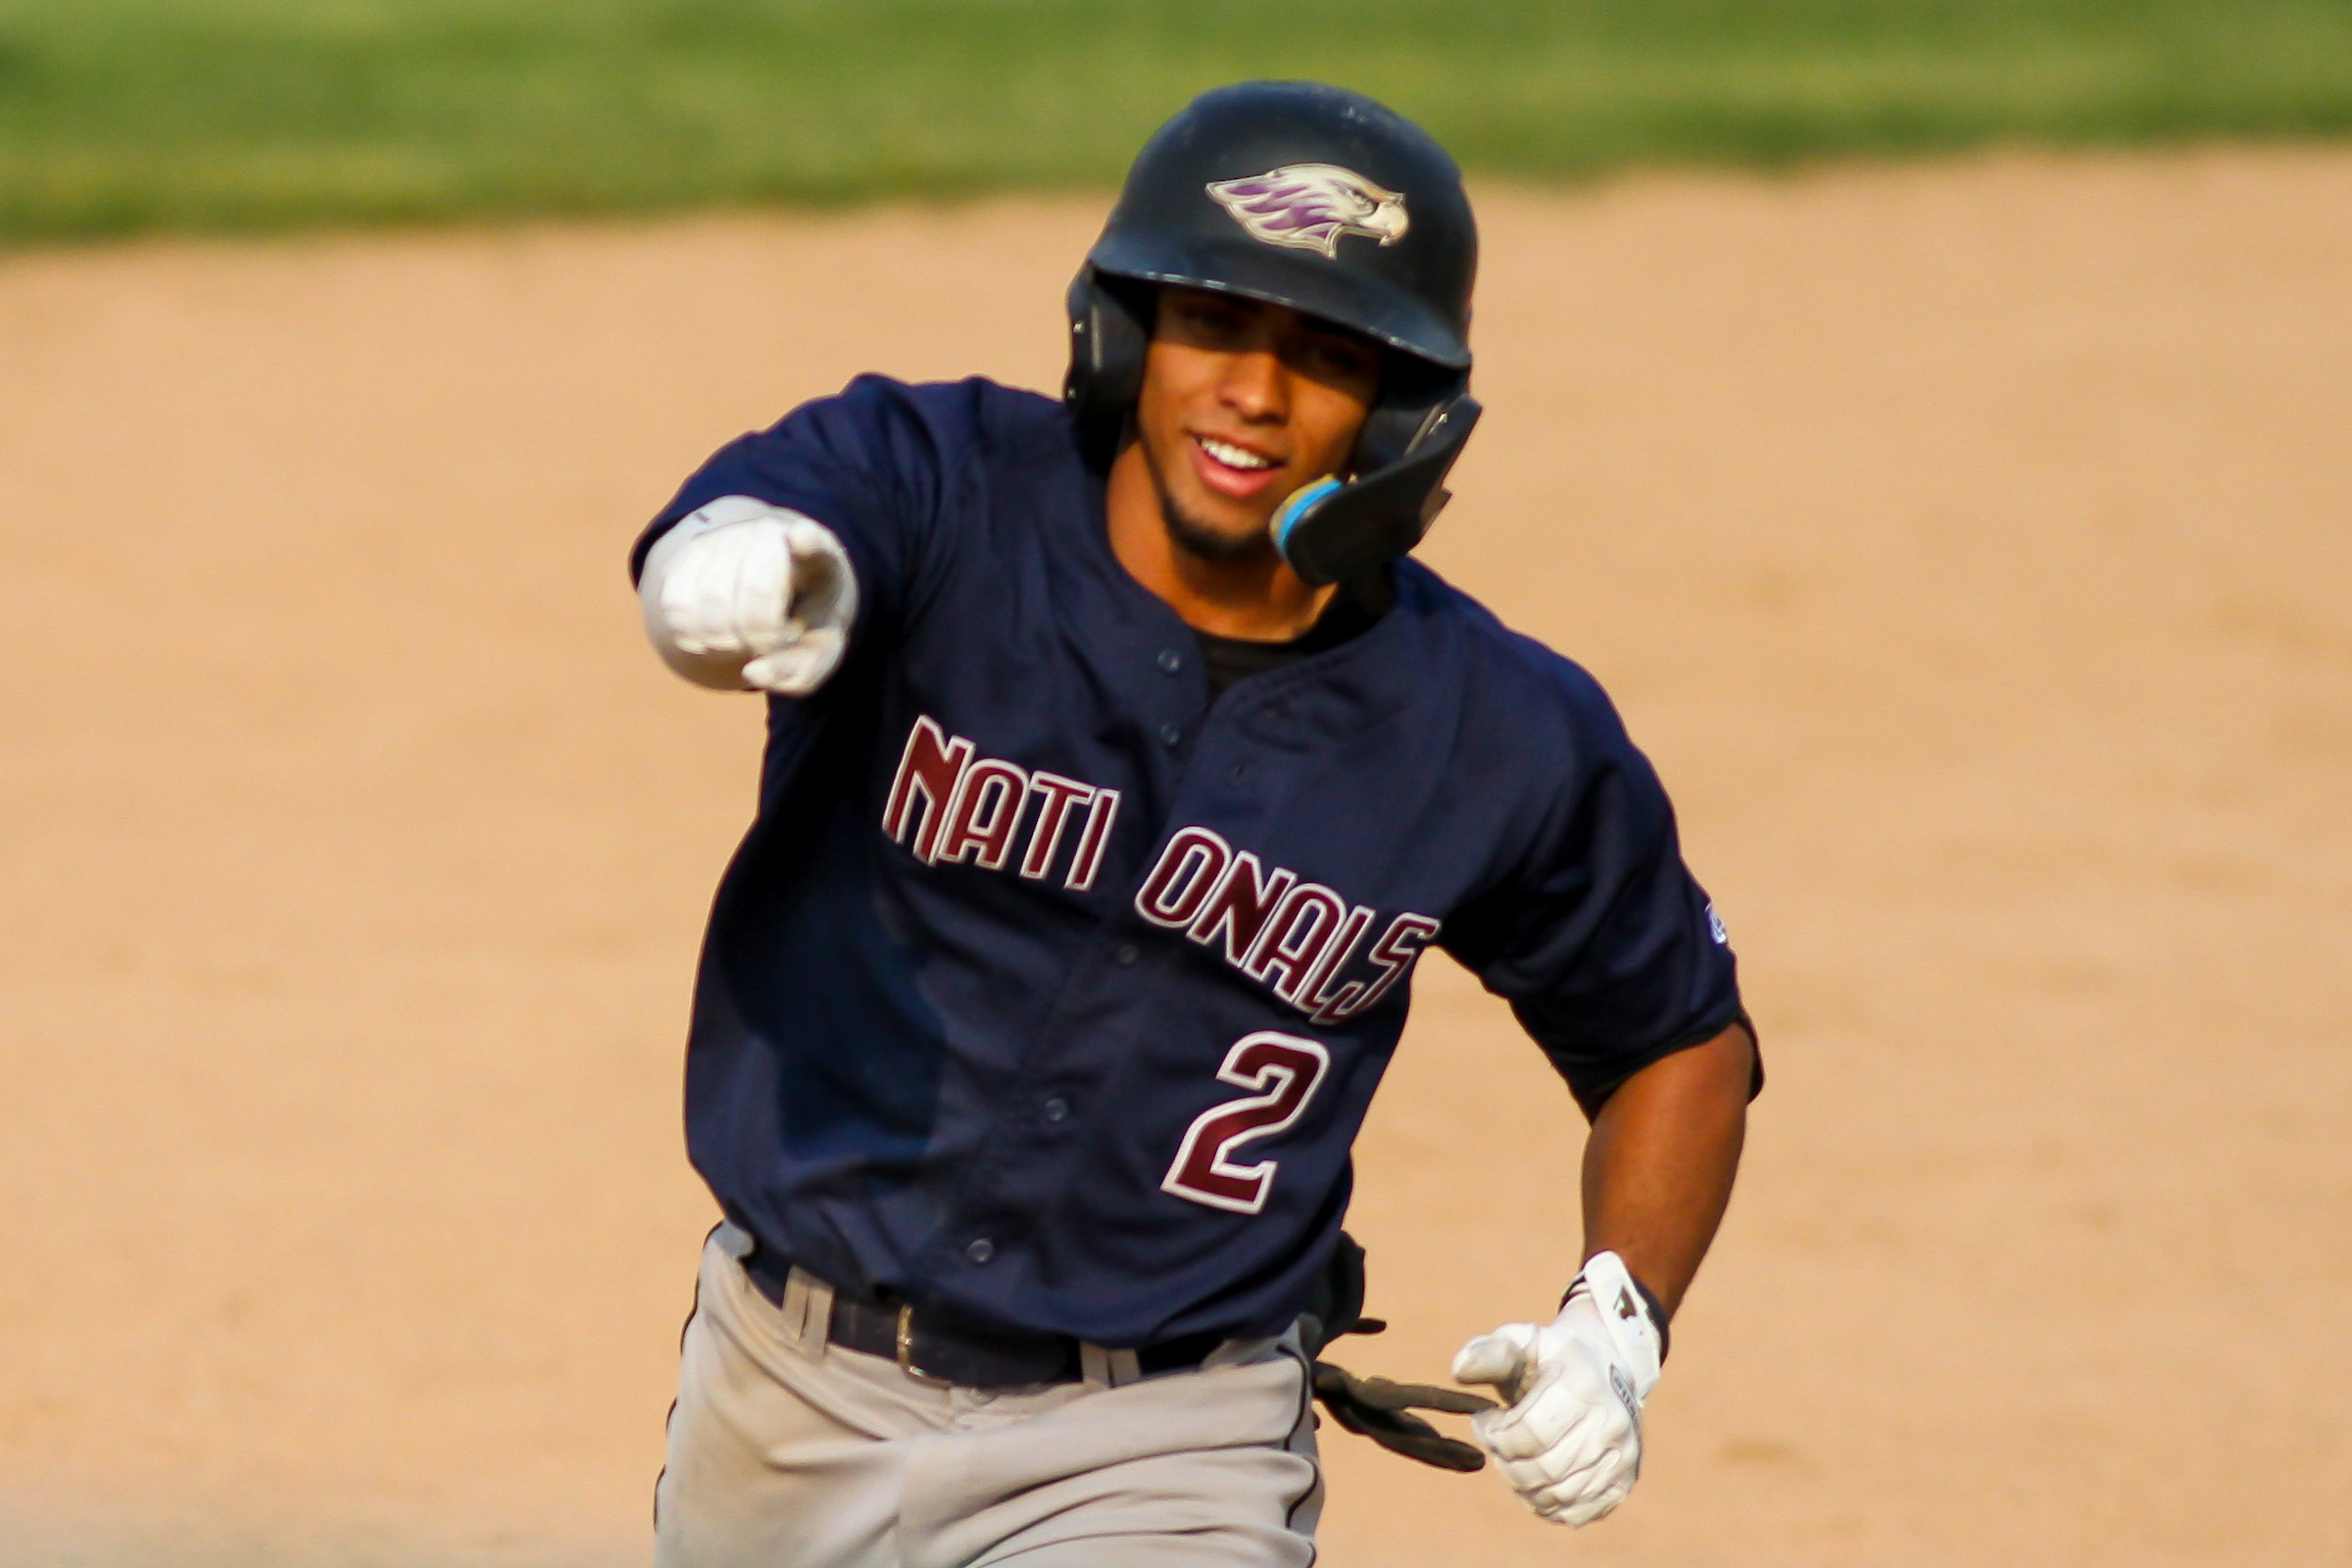 West Allis Nationals shortstop Darryl Jackson (2) during a game against the Green Bay Blue Ribbons on June 17, 2023 at Joannes Stadium in Green Bay, Wisconsin. (Brad Krause/Krause Sports Photography)